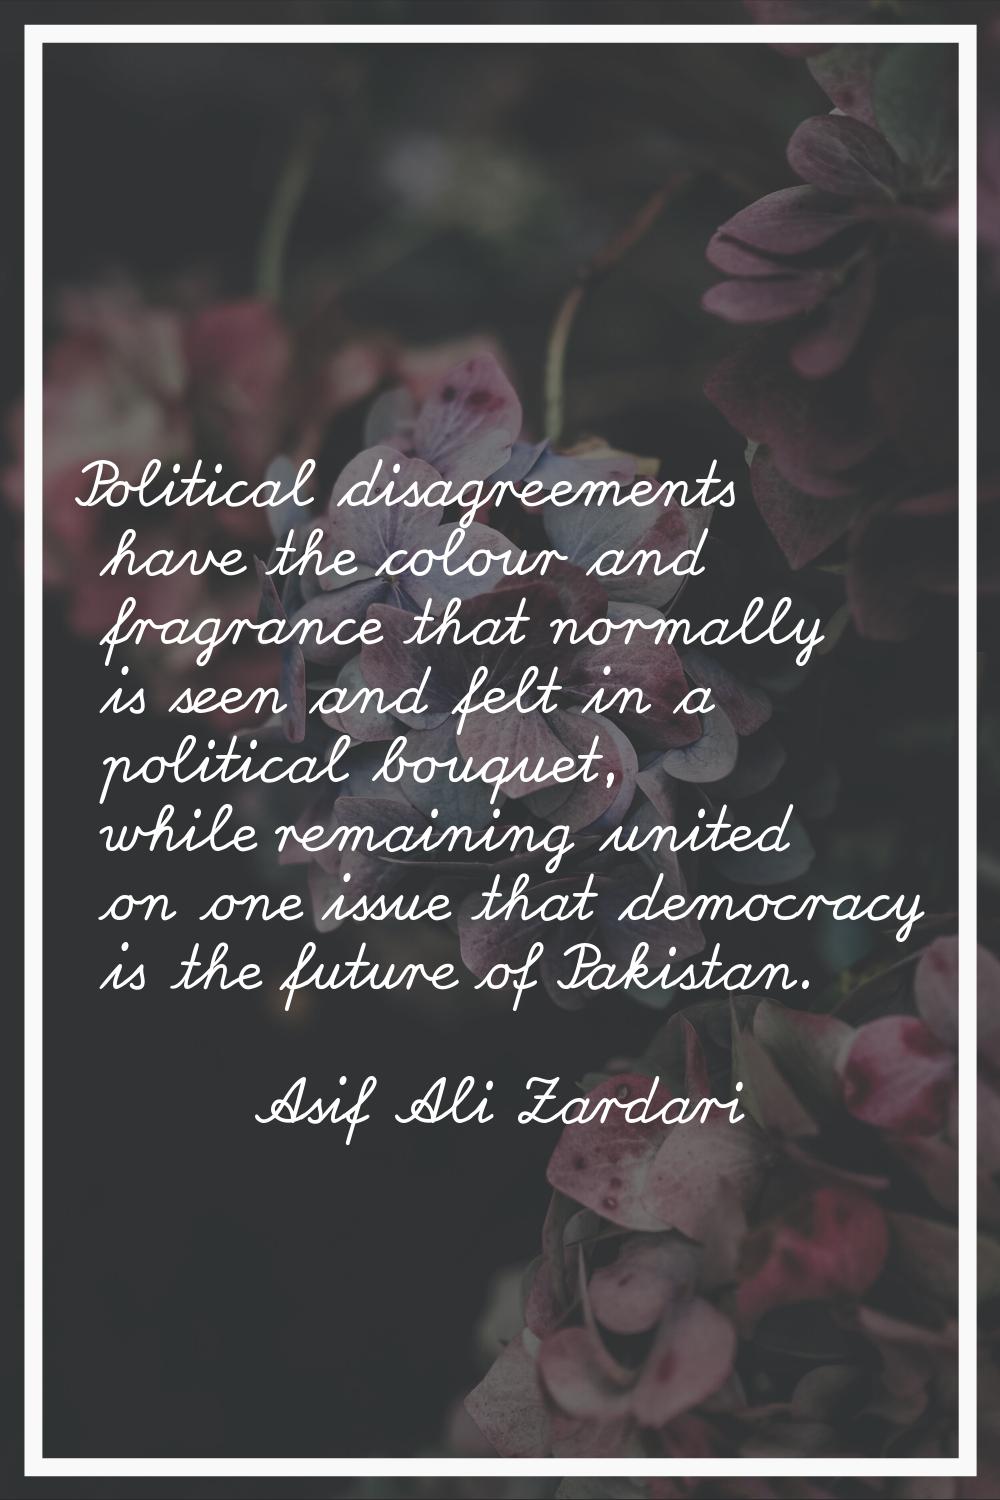 Political disagreements have the colour and fragrance that normally is seen and felt in a political